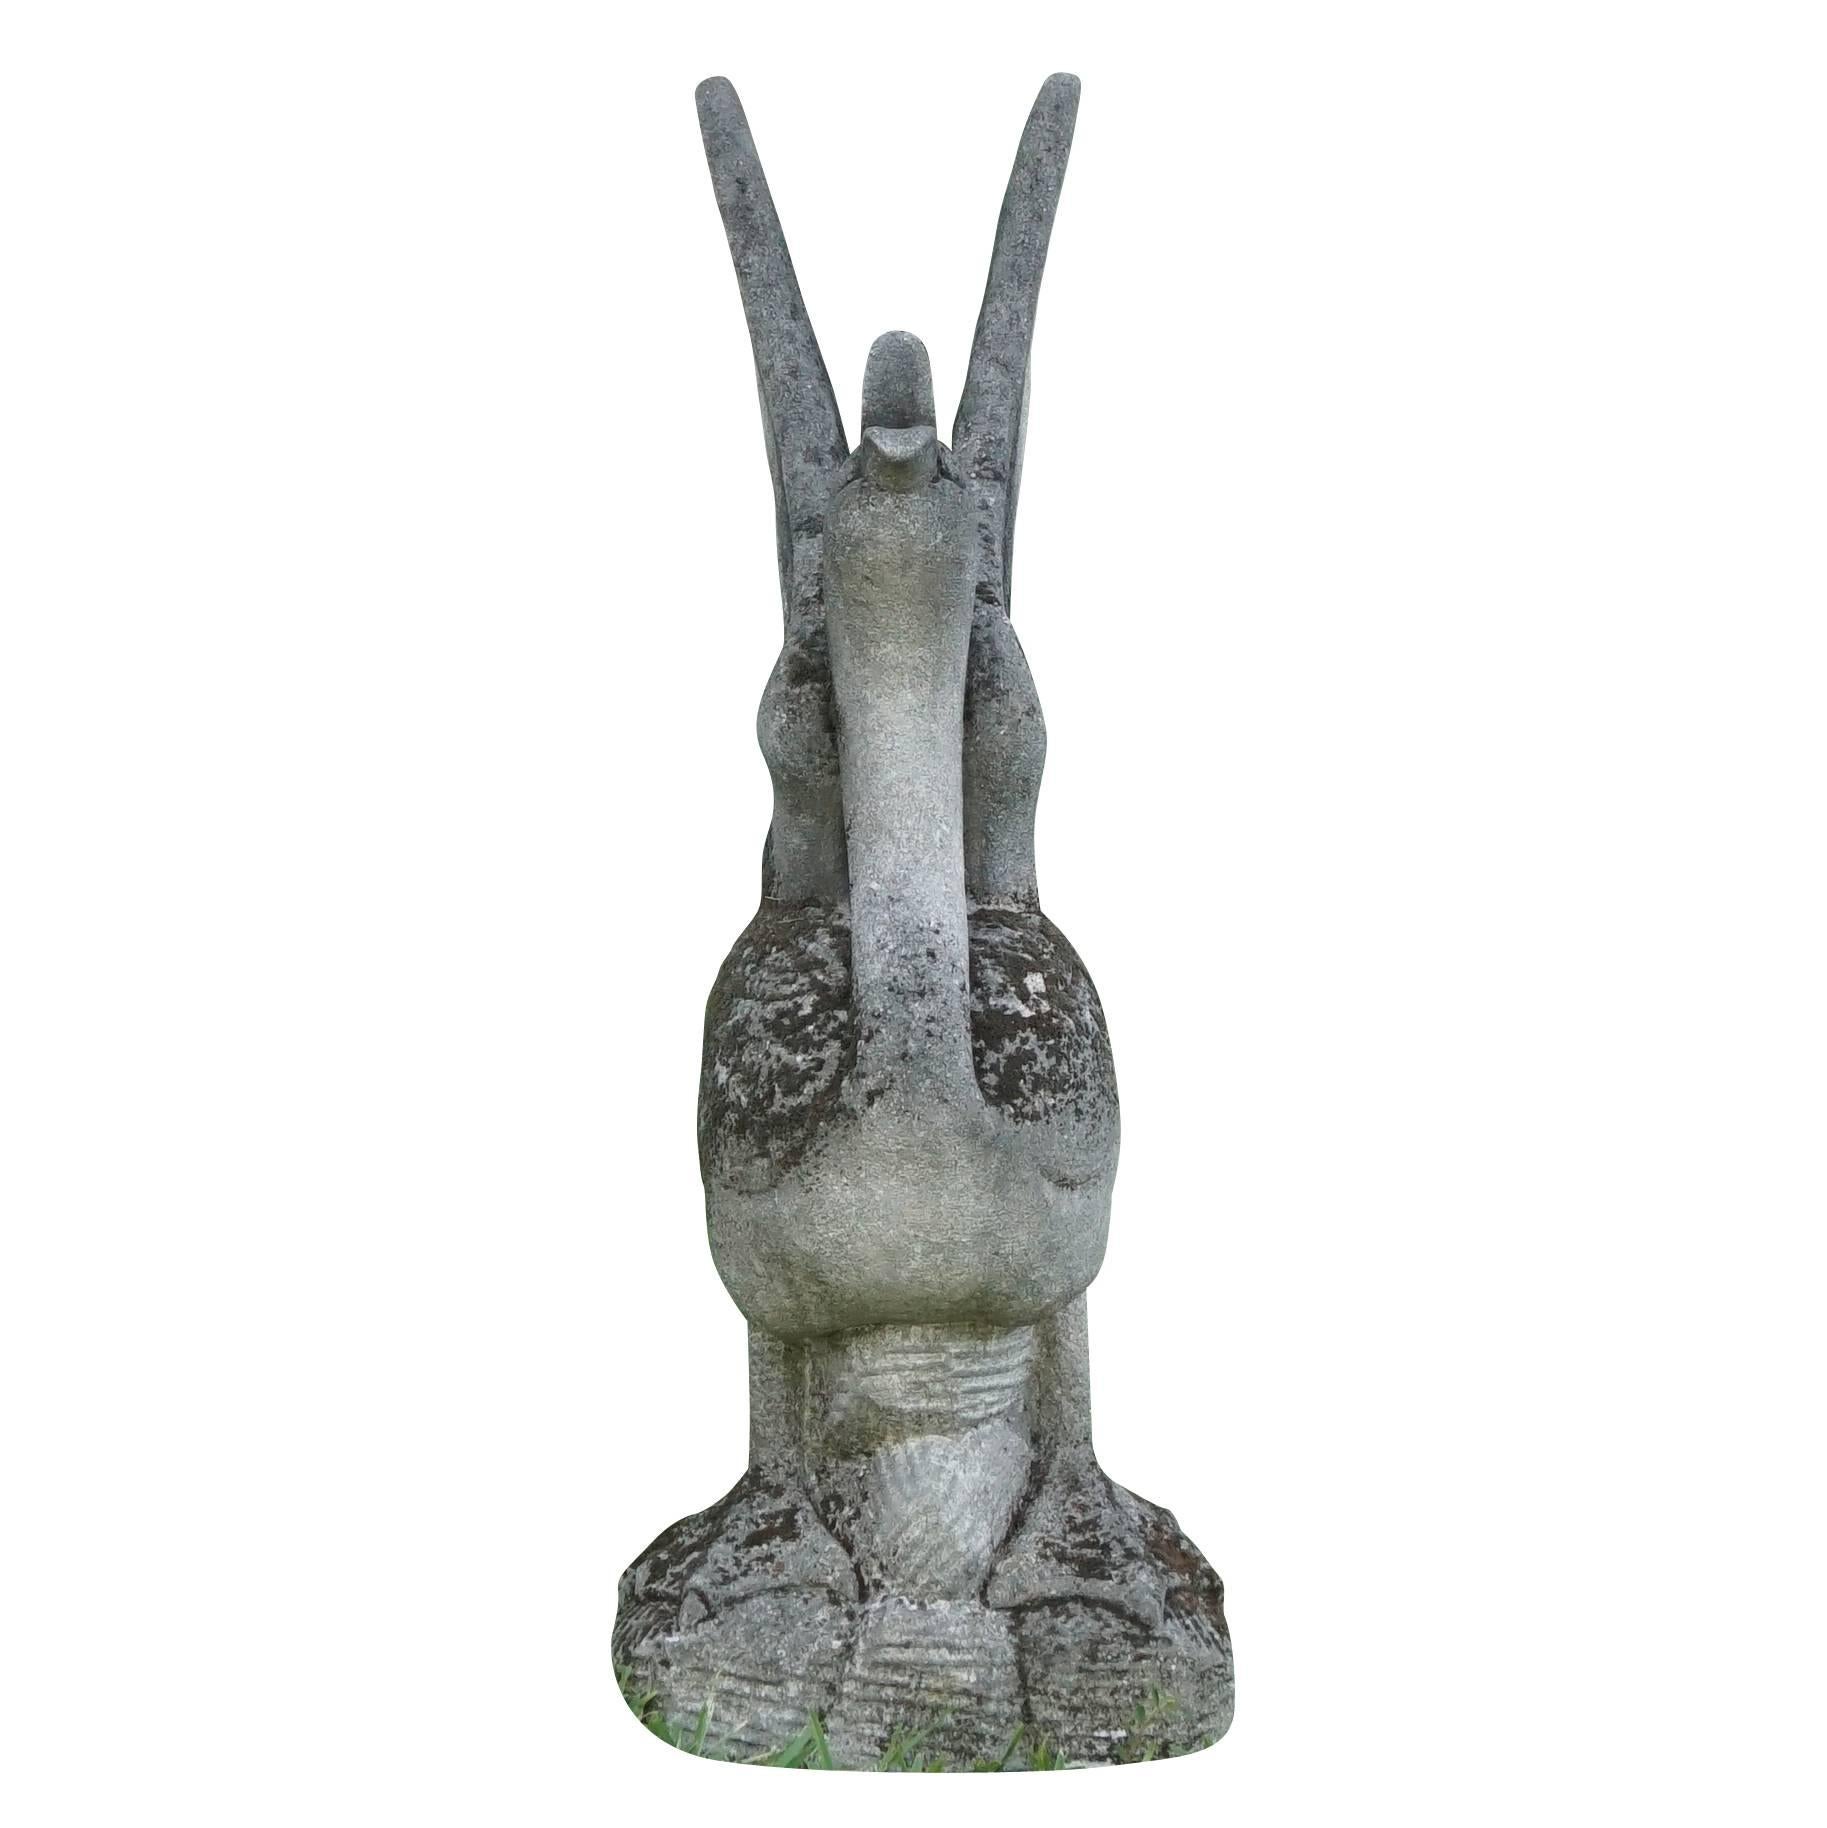 A 20th century, courtship garden statue of a swan flapping its wings with an open beak. This hand-carved statue is standing on an attached base and from an estate in Friuli, Italy.
Beautifully aged patina with lichen and moss.